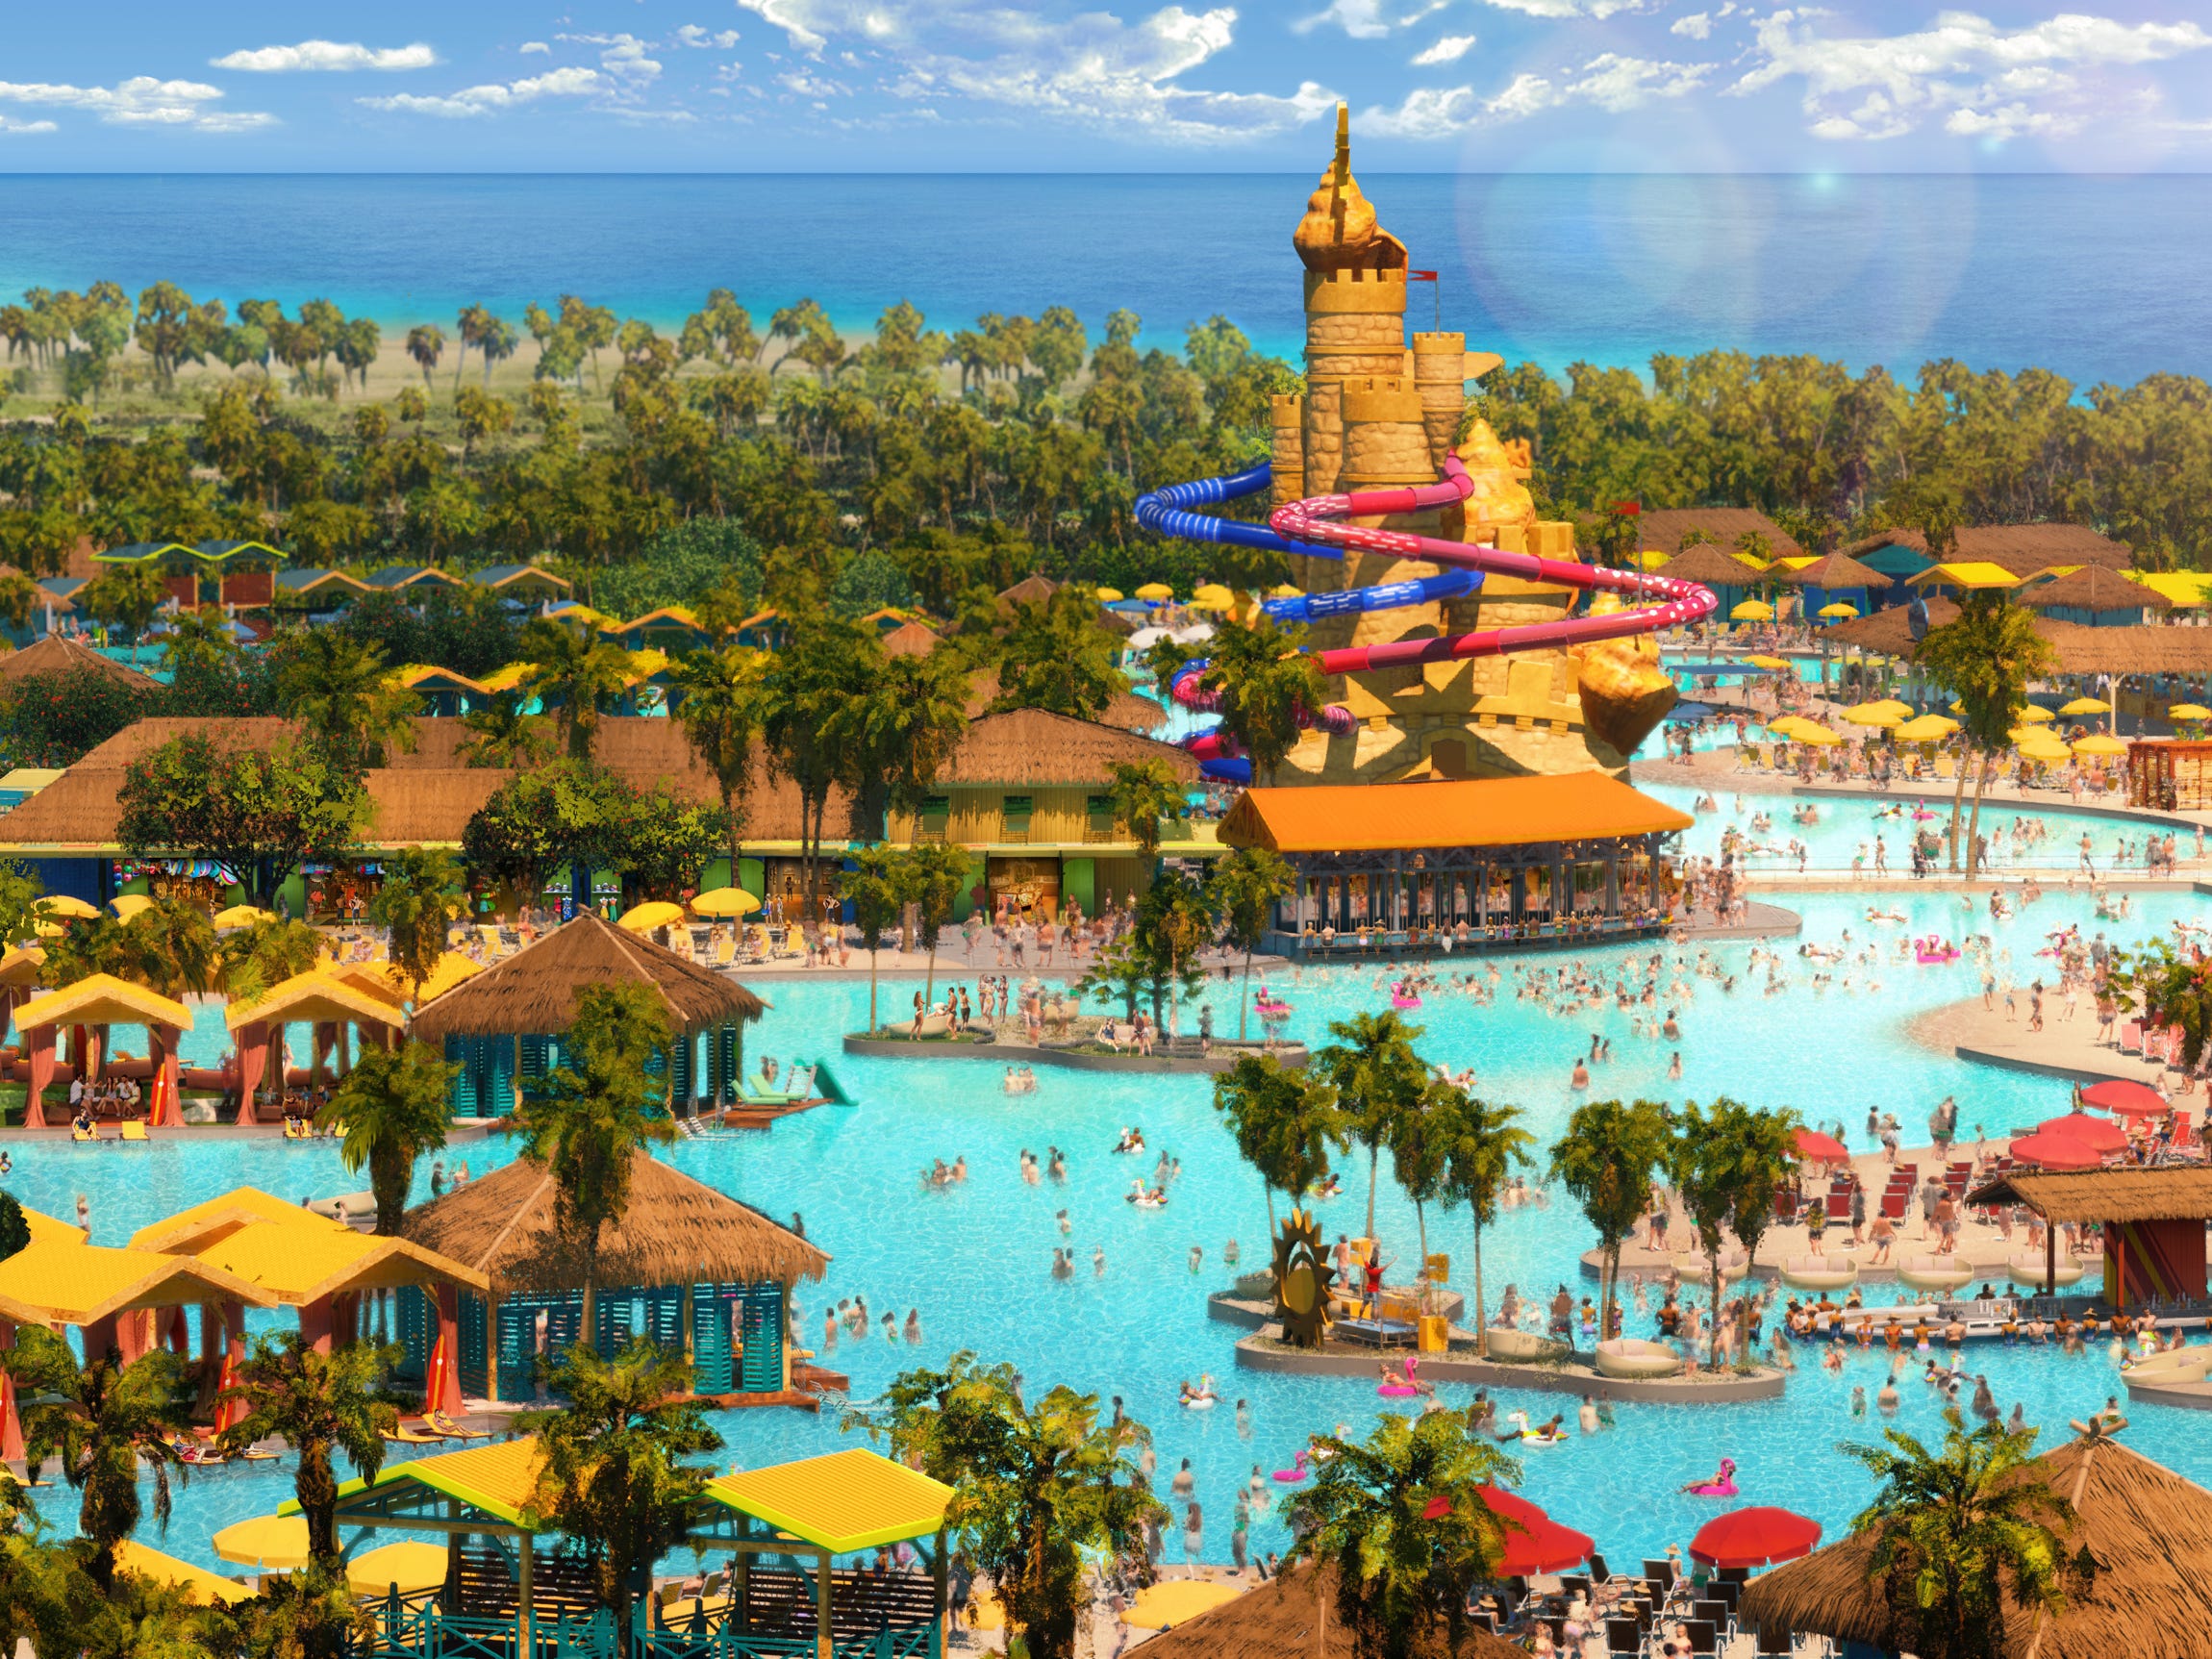 <ul class="summary-list"><li>Carnival Cruise Line's new private destination, Celebration Key, is set to open in July 2025.</li><li>The $500 million project is set to feature resort-like amenities and host 2 million guests a year.</li><li><a href="https://www.businessinsider.com/royal-caribbeans-250-million-private-island-seeing-strong-demand-photos-2023-3">Cruise line-run private islands</a> have been big moneymakers for operators like Carnival and Royal Caribbean. </li></ul><p>One of <a href="https://www.businessinsider.com/cruise-lines-are-running-low-on-cabins-2023-11">Carnival Cruise Line’s</a> upcoming $500 million projects has the potential to become a massive money tree for the popular operator.</p><p>And no, it’s not a cruise ship. It’s a mile-long slice of beachfront land on <a href="https://www.businessinsider.com/photos-i-sailed-margairatvilles-new-cruise-ship-wont-again-2022-5">Grand Bahama island</a>. Carnival is turning the land into its own private destination.</p><p>The cruise line says this slice of the Bahamas — dubbed Celebration Key — is set to flex resort-like amenities, including cabanas by the ocean and an infinity pool at the adults-only club.</p><p>But would-be visitors will have to be patient: It's not scheduled to begin welcoming cruisers until July 2025.</p><div class="read-original">Read the original article on <a href="https://www.businessinsider.com/carnival-cruise-lines-private-island-beach-destination-celebration-key-photos-2024-2">Business Insider</a></div>